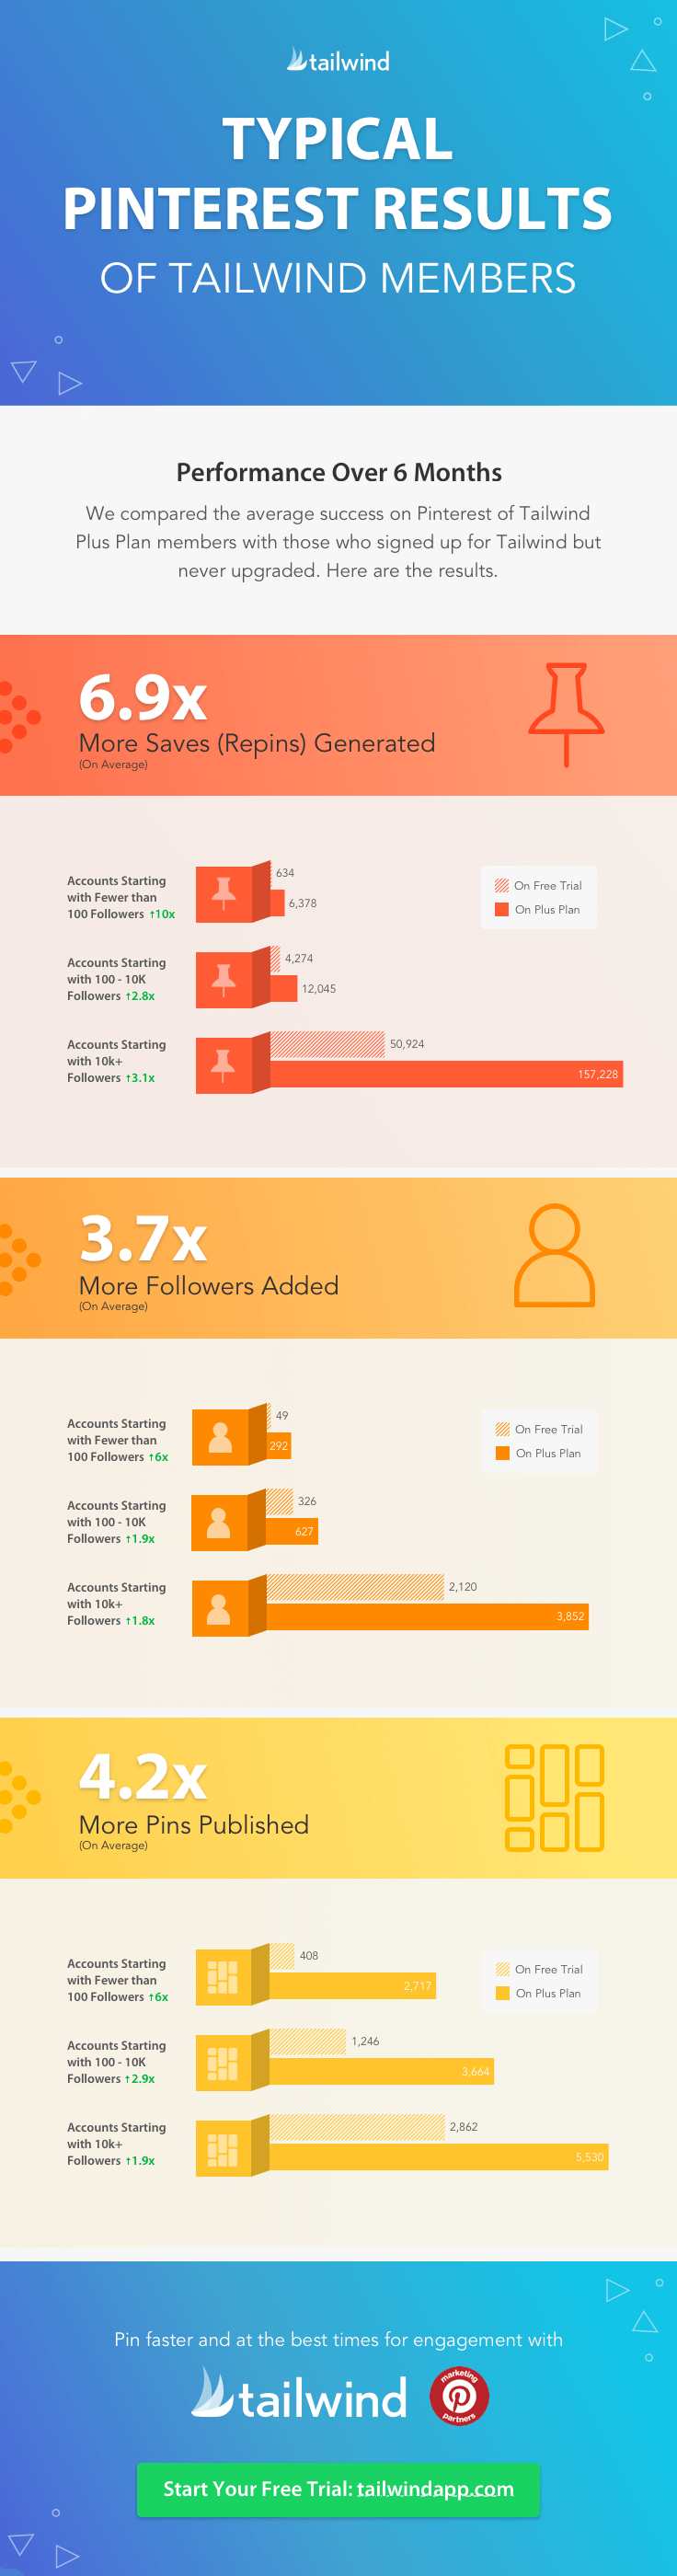 Infographic about typical Pinterest Results of Tailwind Members